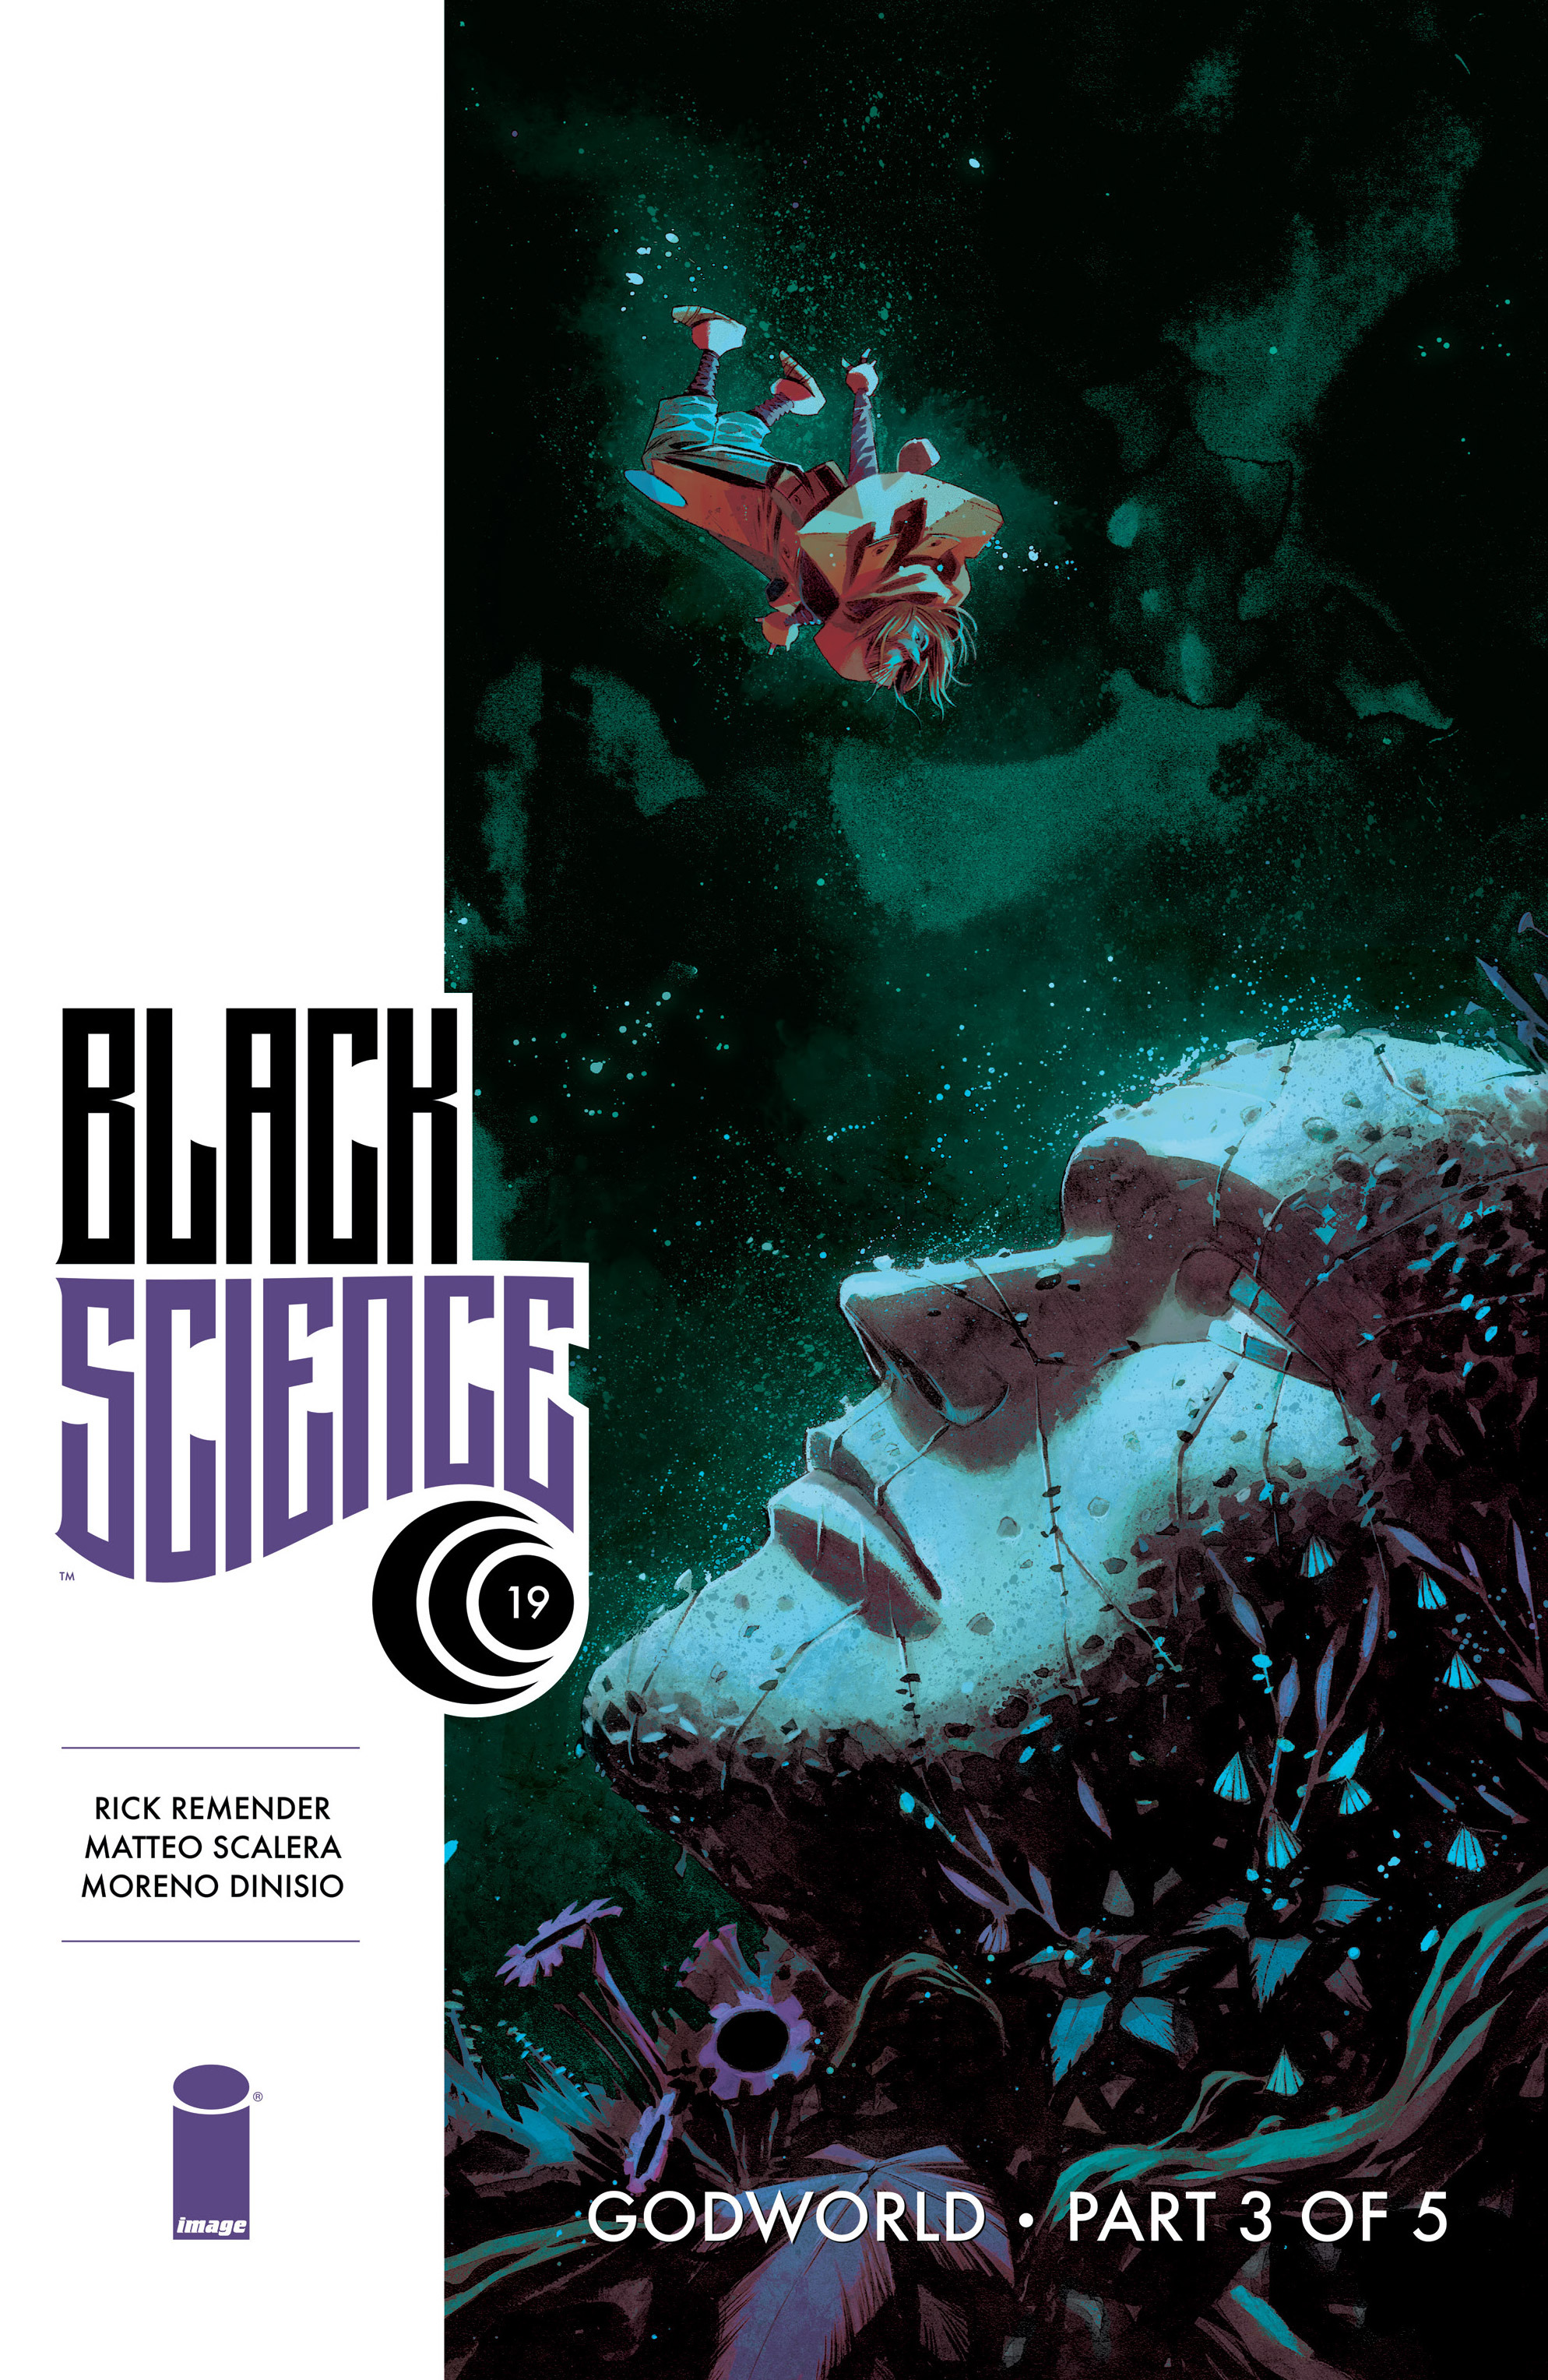 Read online Black Science comic -  Issue #19 - 1